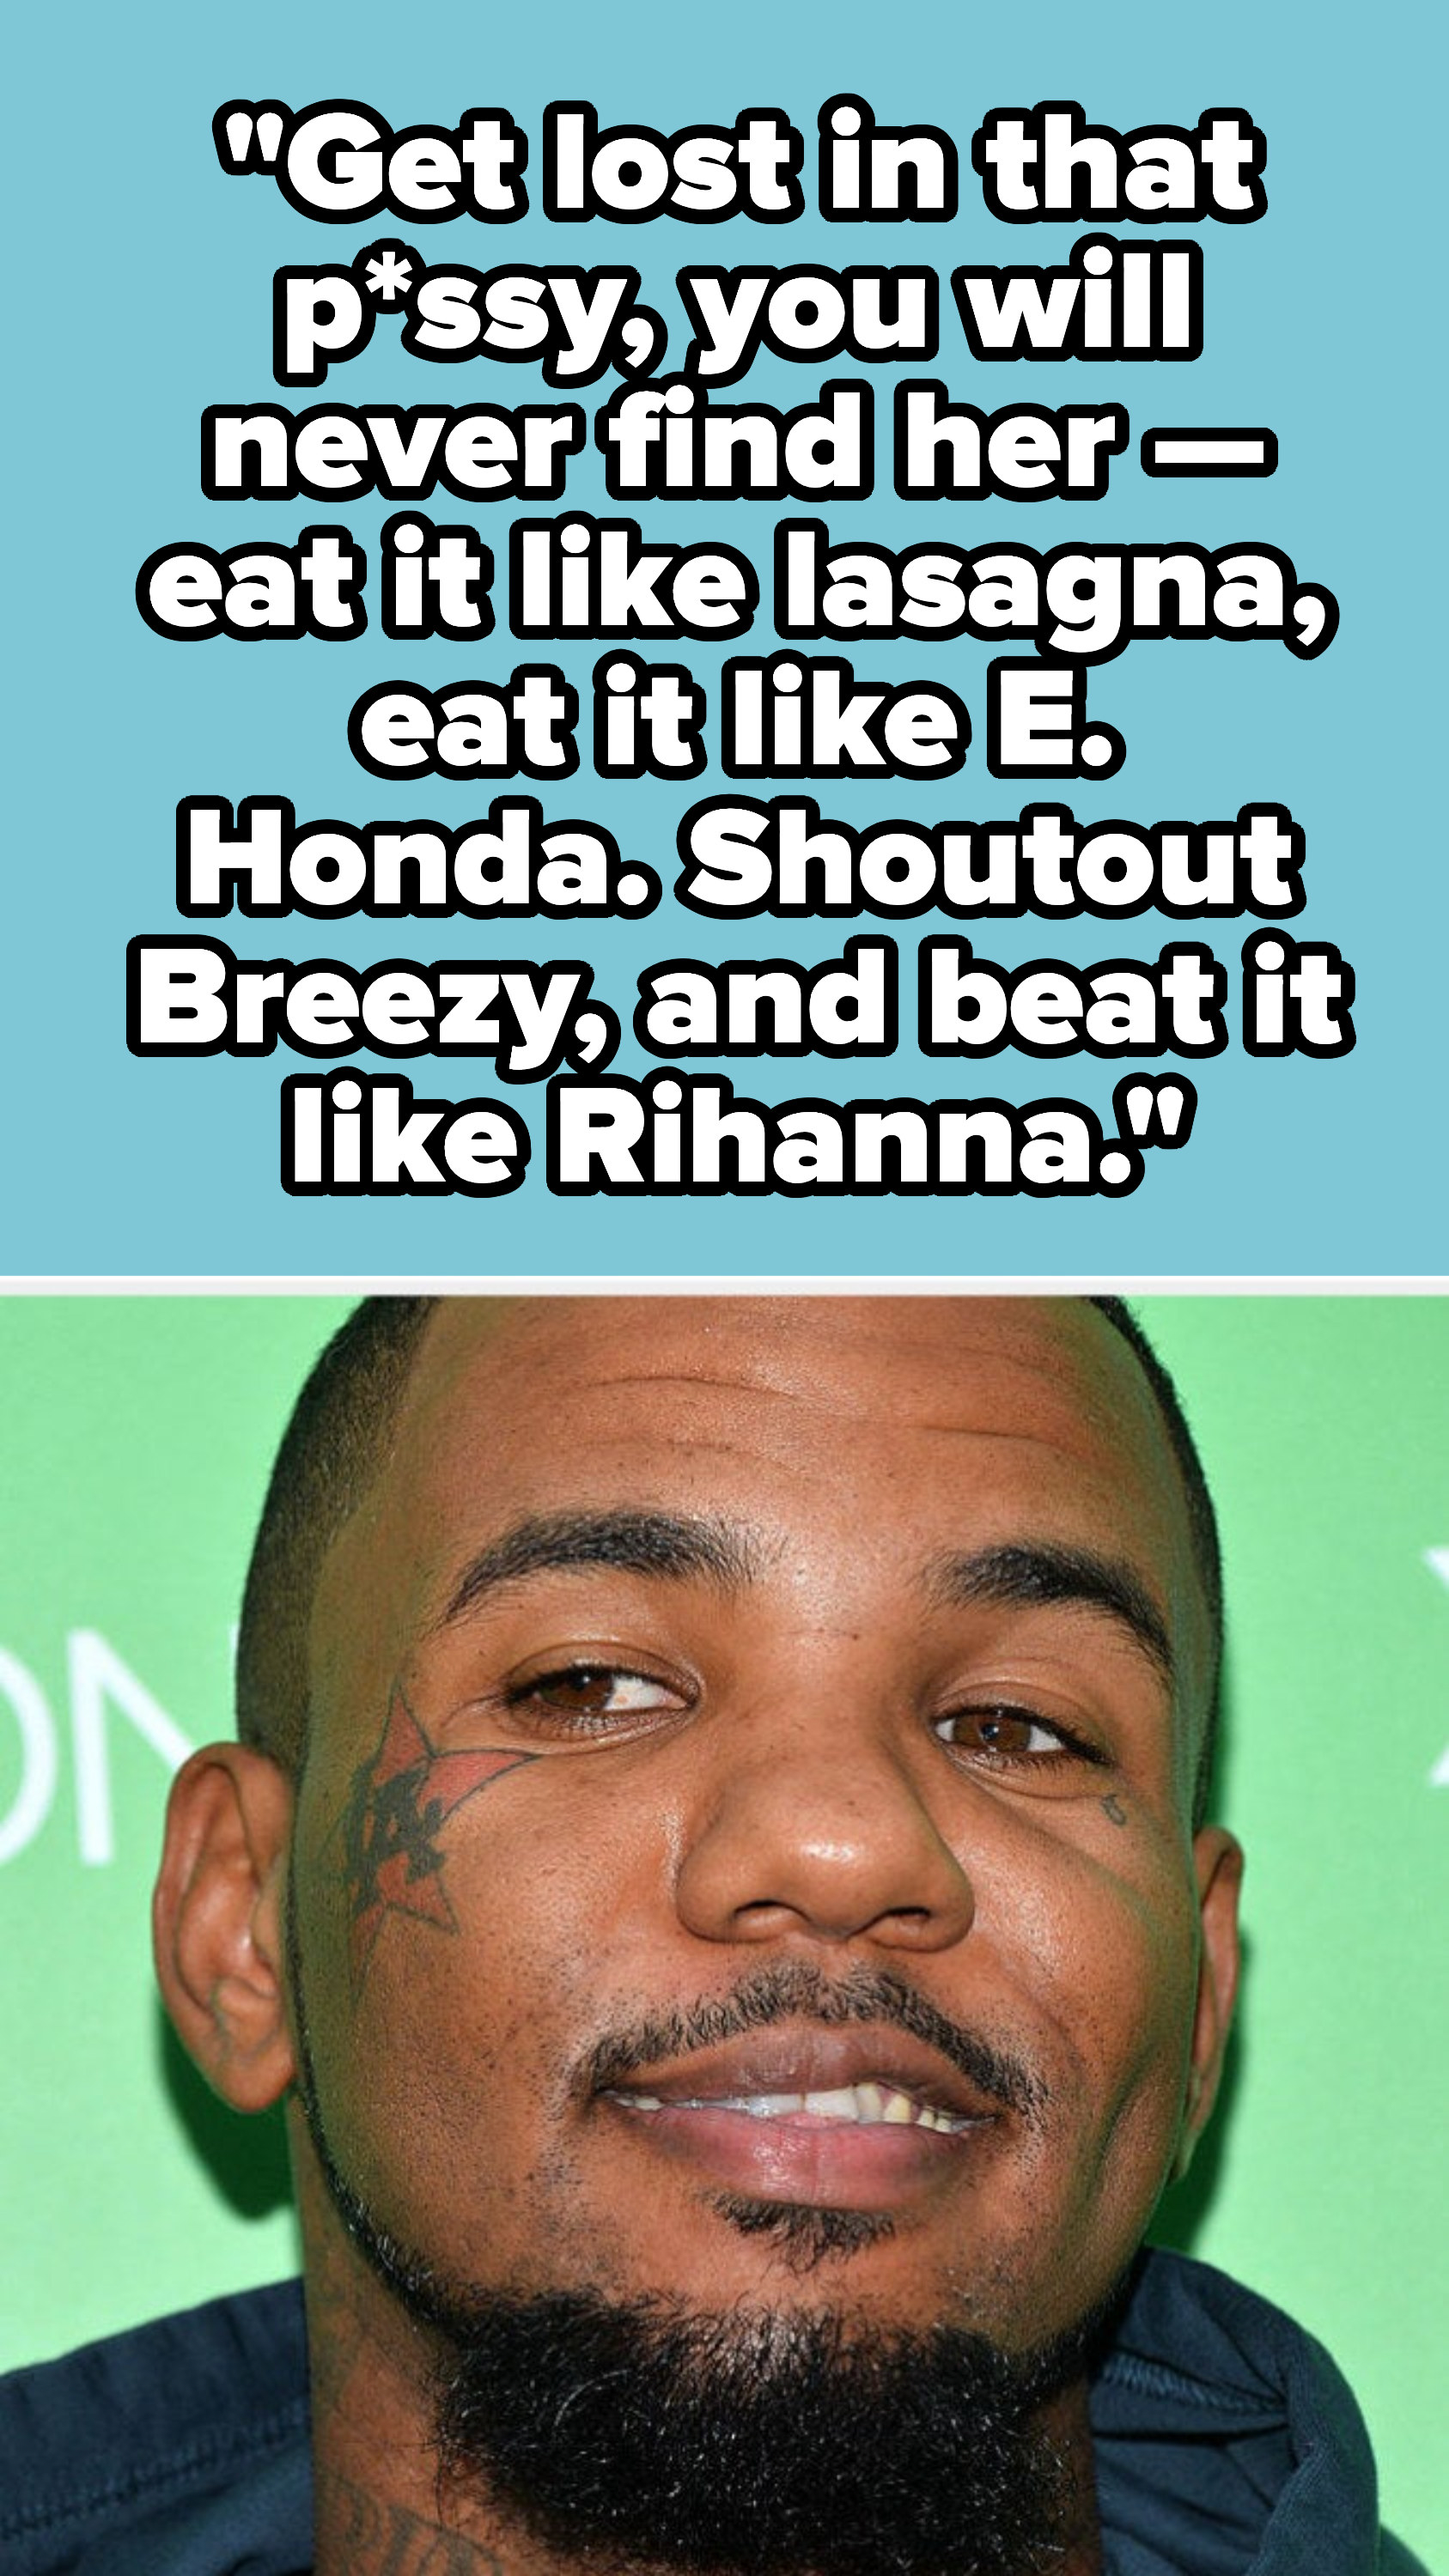 The Game verse: &quot;Get lost in that pussy, you will never find her — eat it like lasagna, eat it like E. Honda. Shoutout Breezy, and beat it like Rihanna&quot;